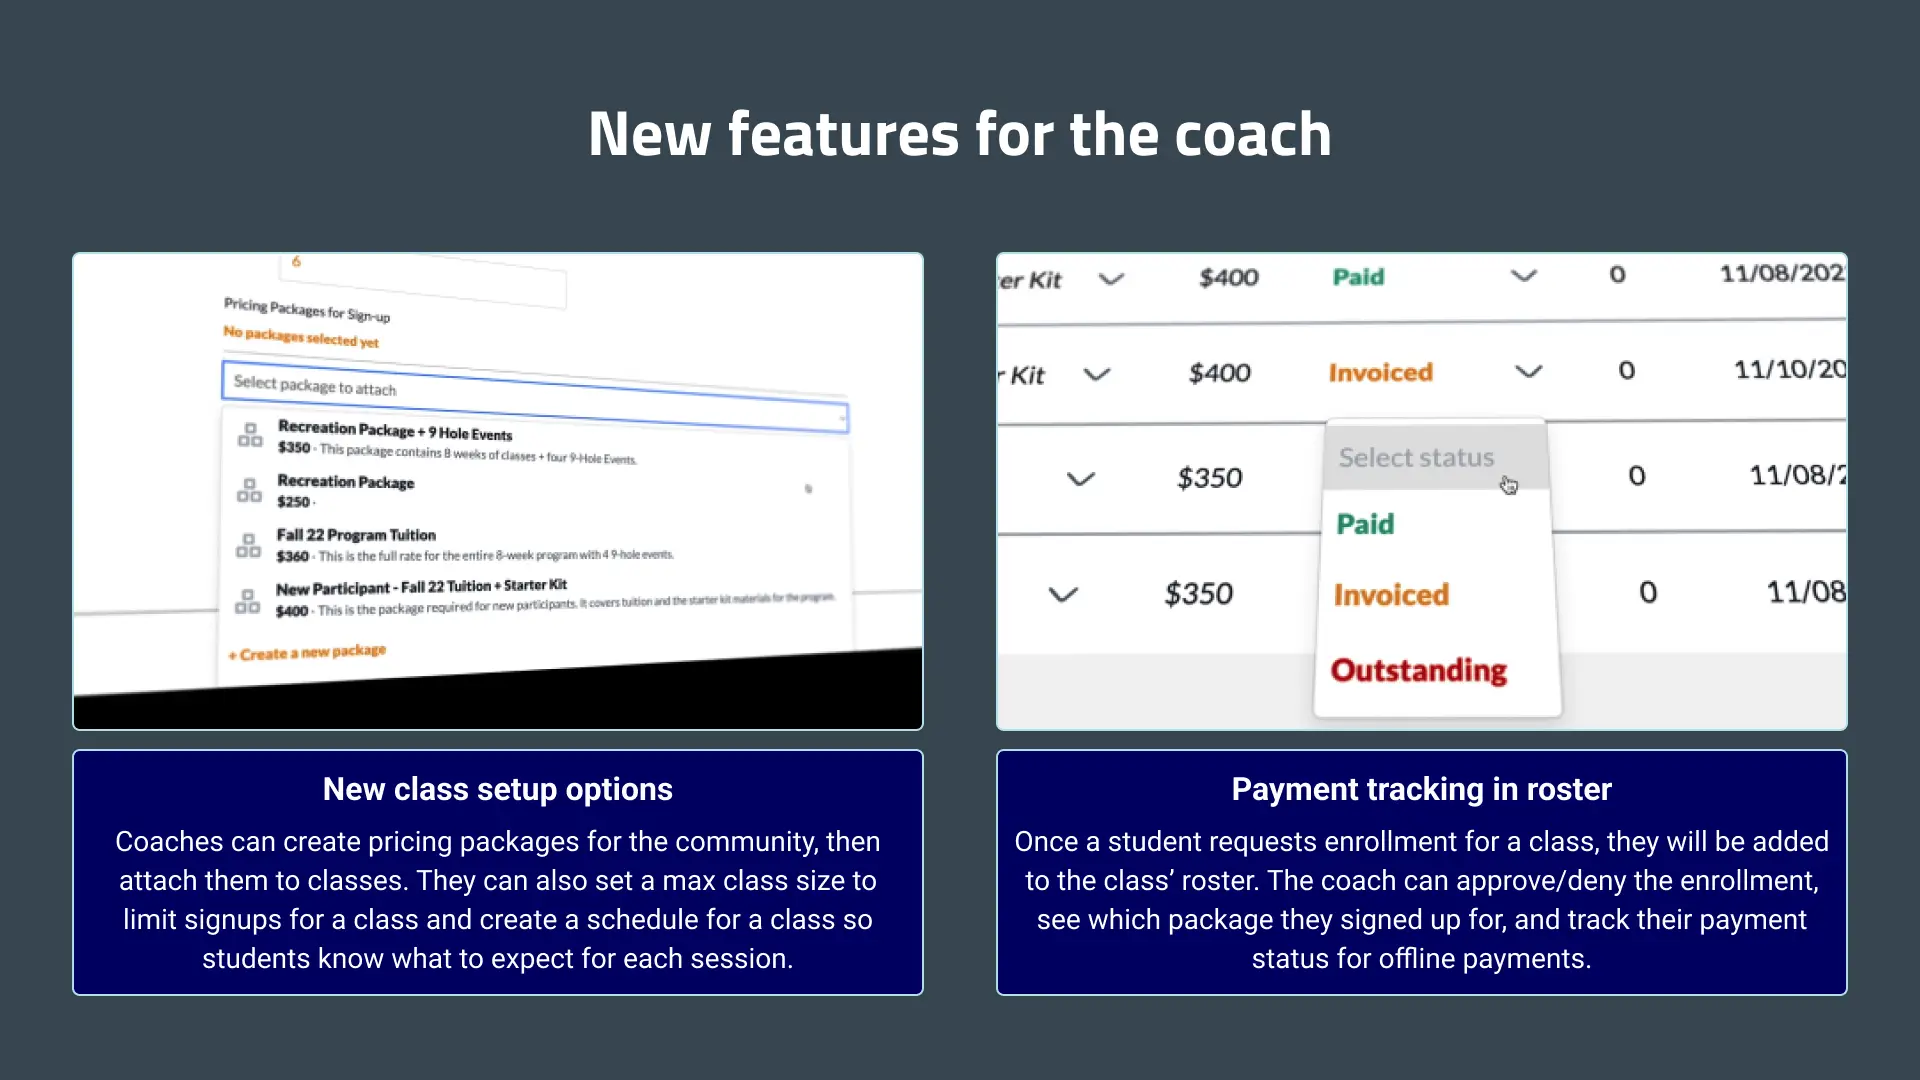 New features for the coach in the Op 36 web app.